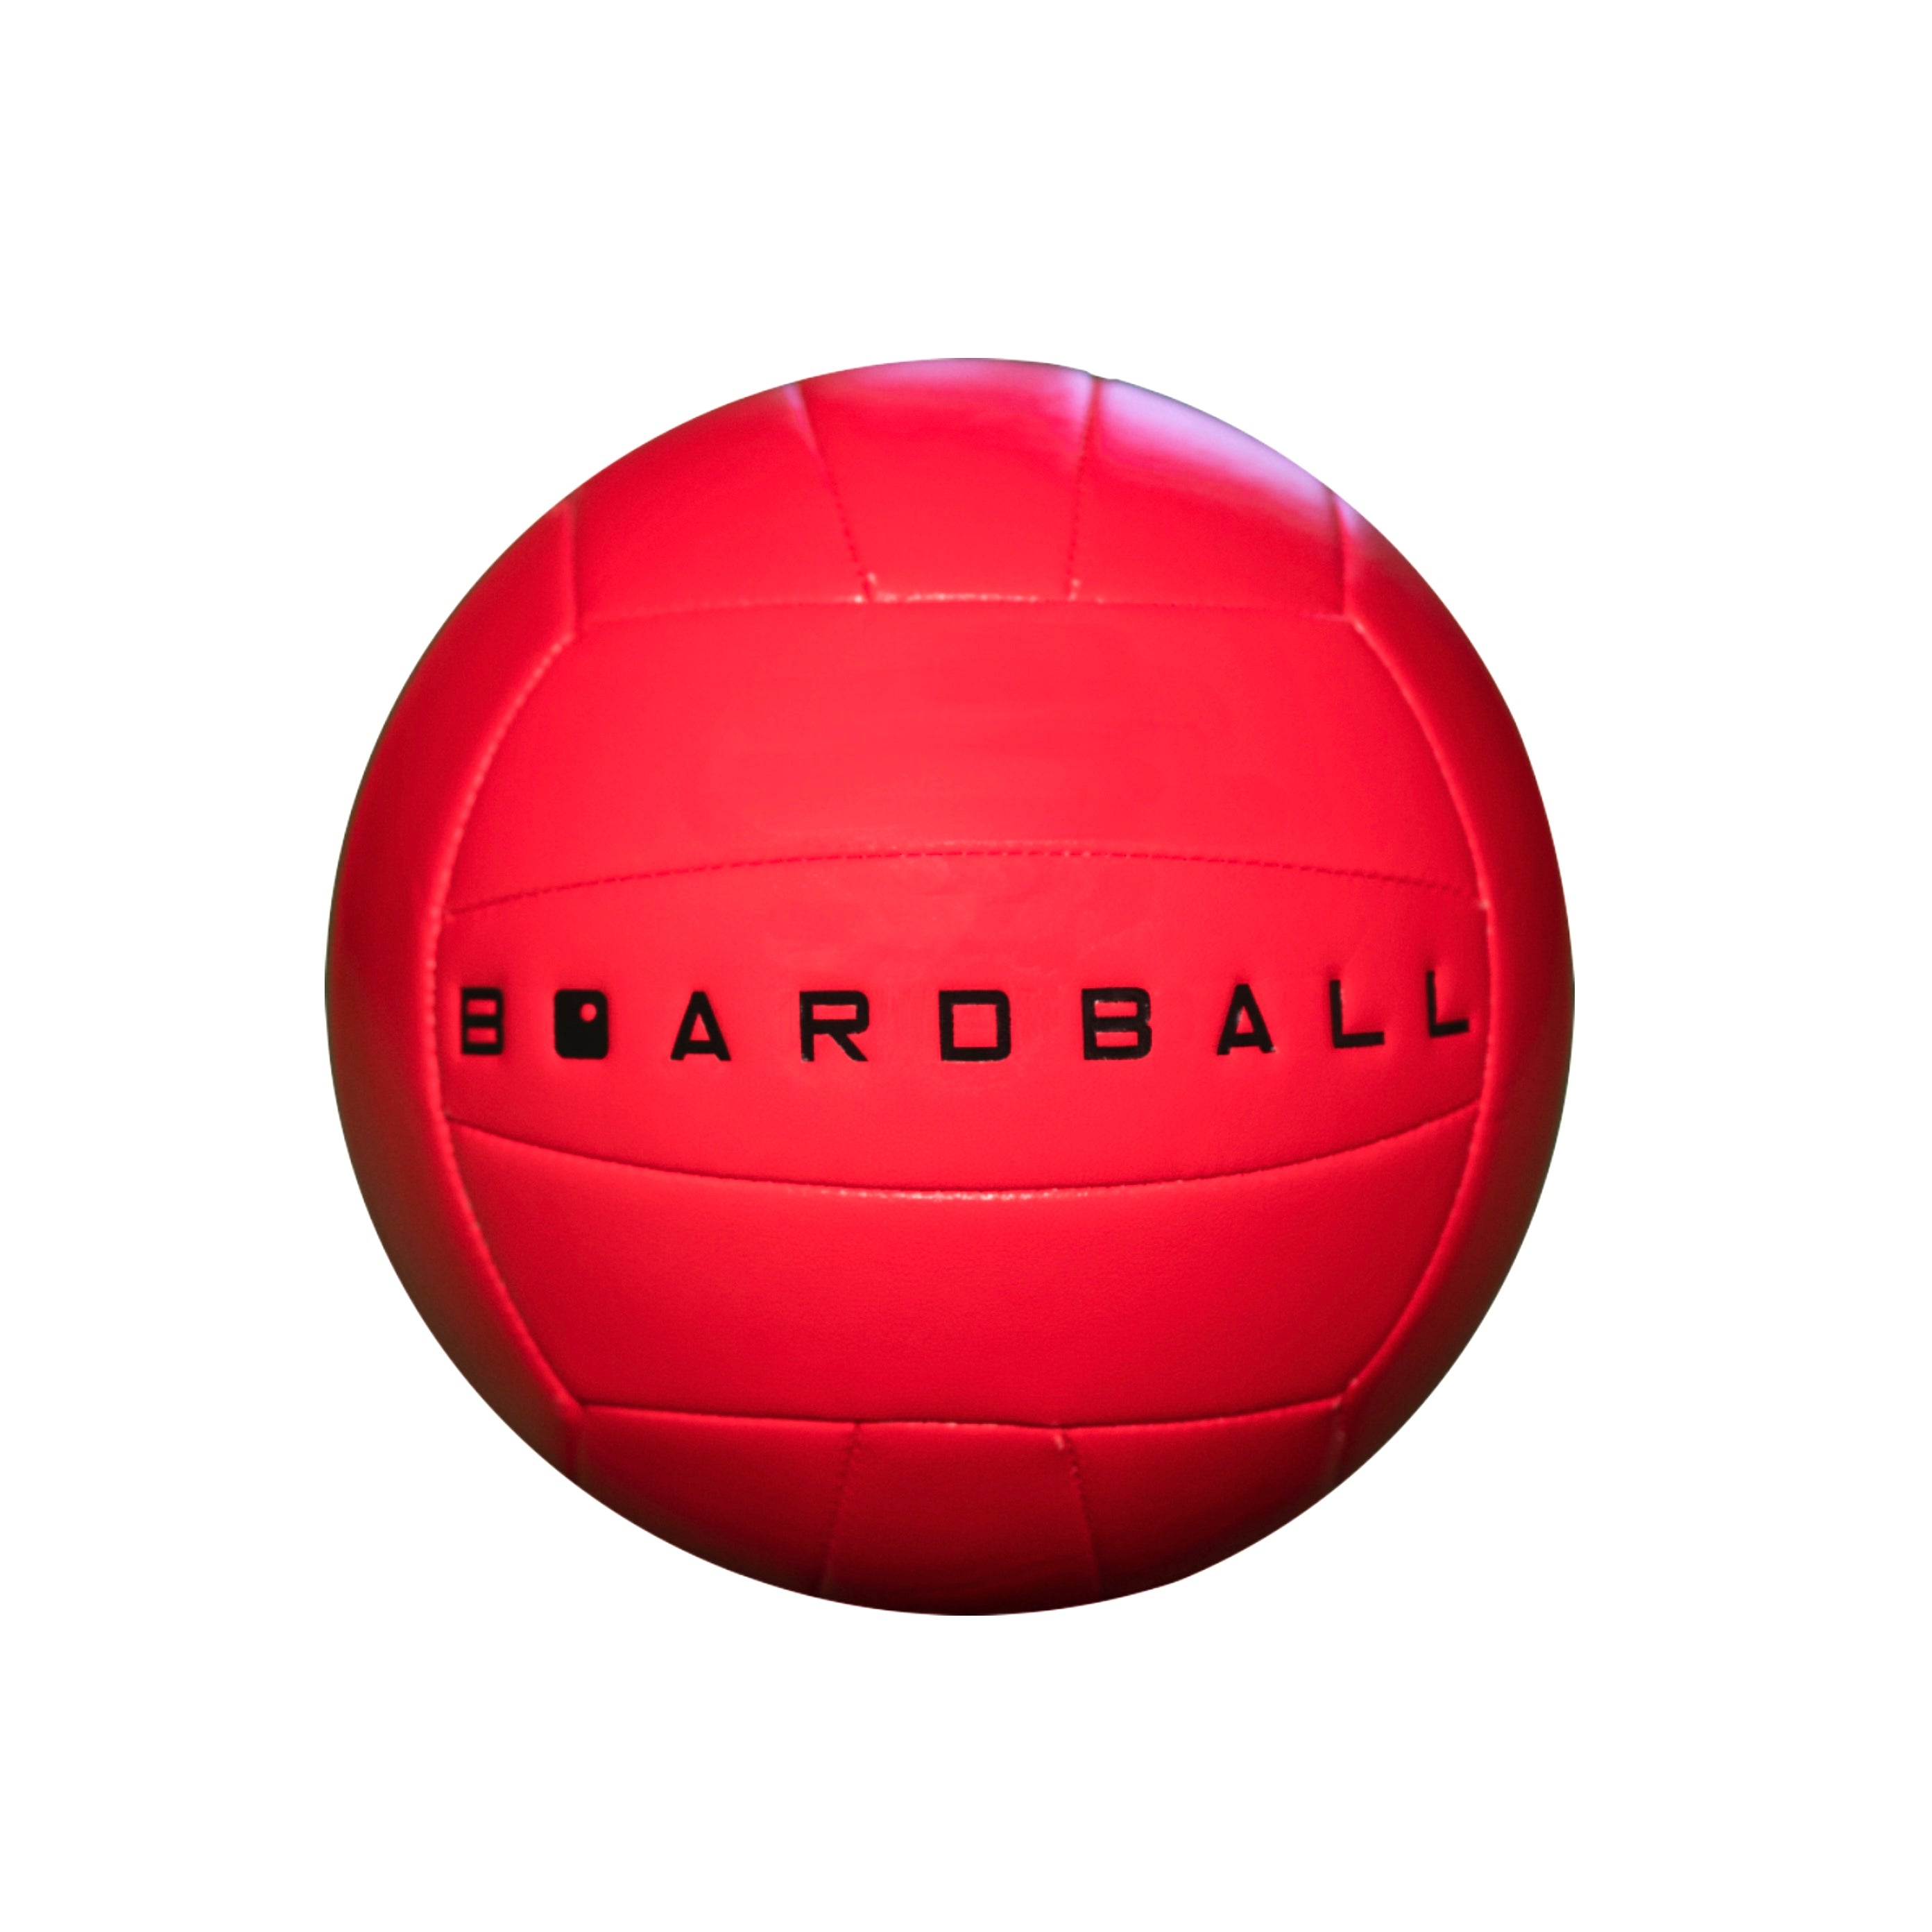 Boardball Ball (Official Volleyball Size 5)